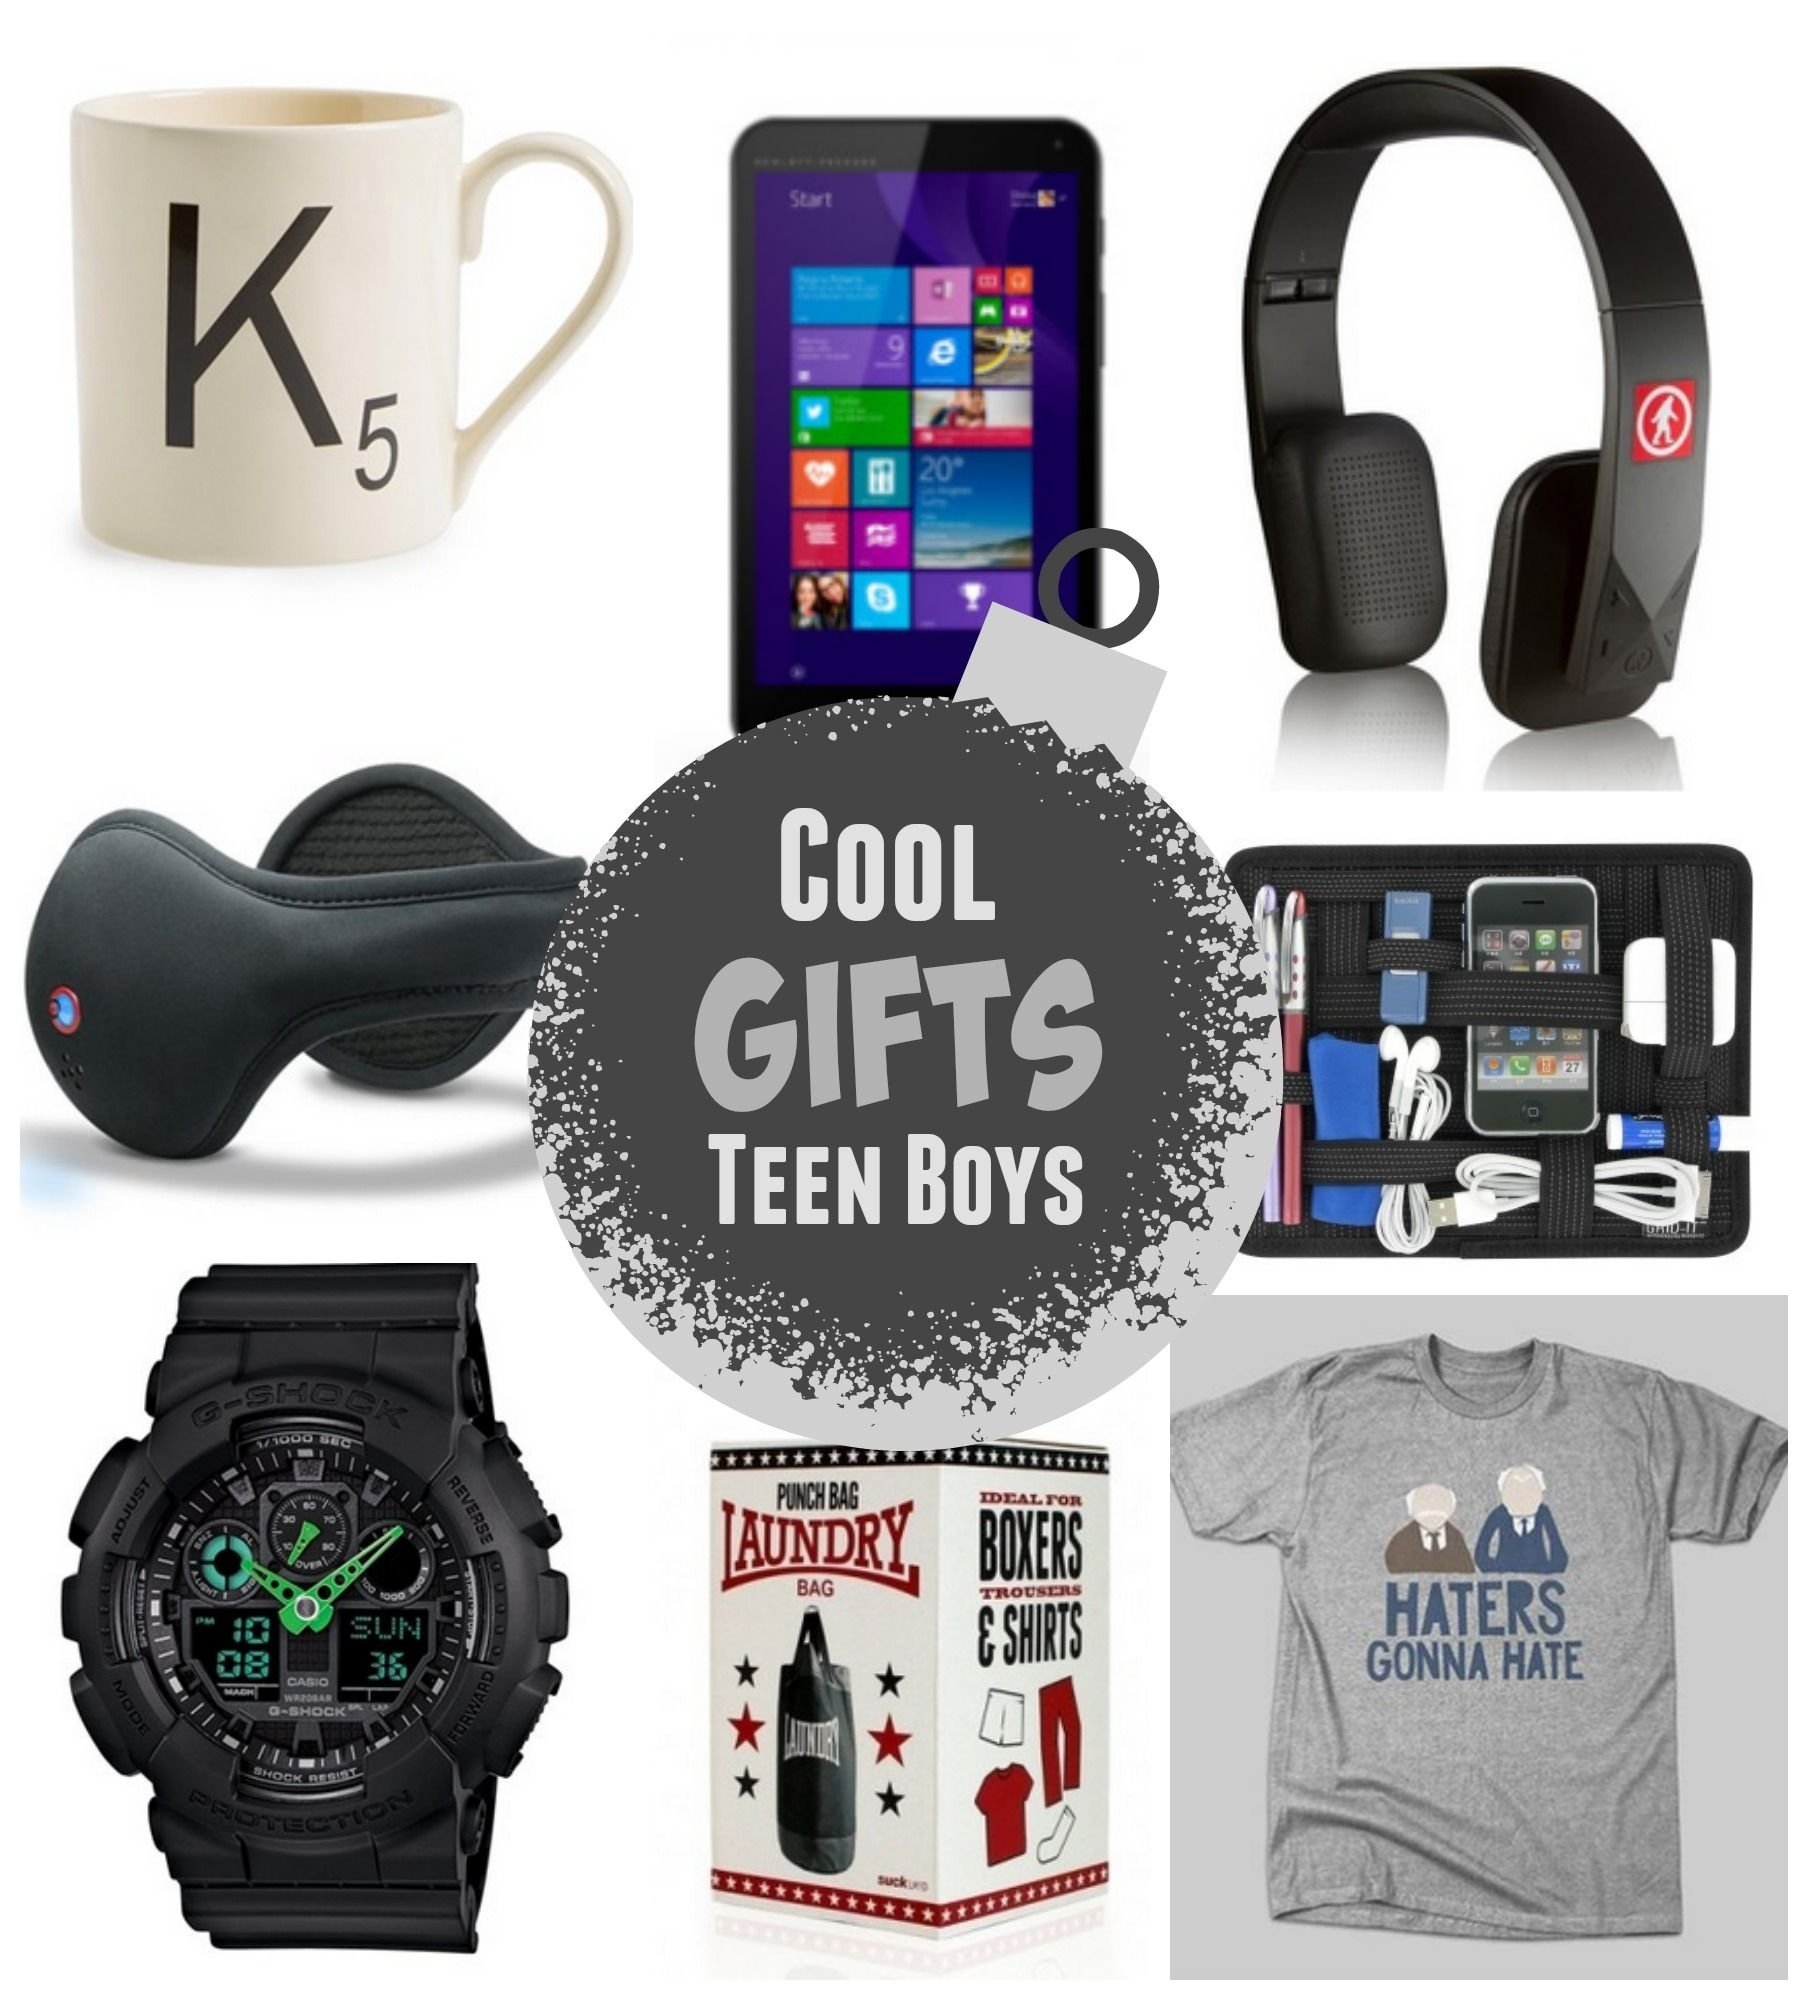 10 Nice Cool Ideas For Christmas Gifts cool gift ideas for teen boys teen boys teen and gift 4 2022